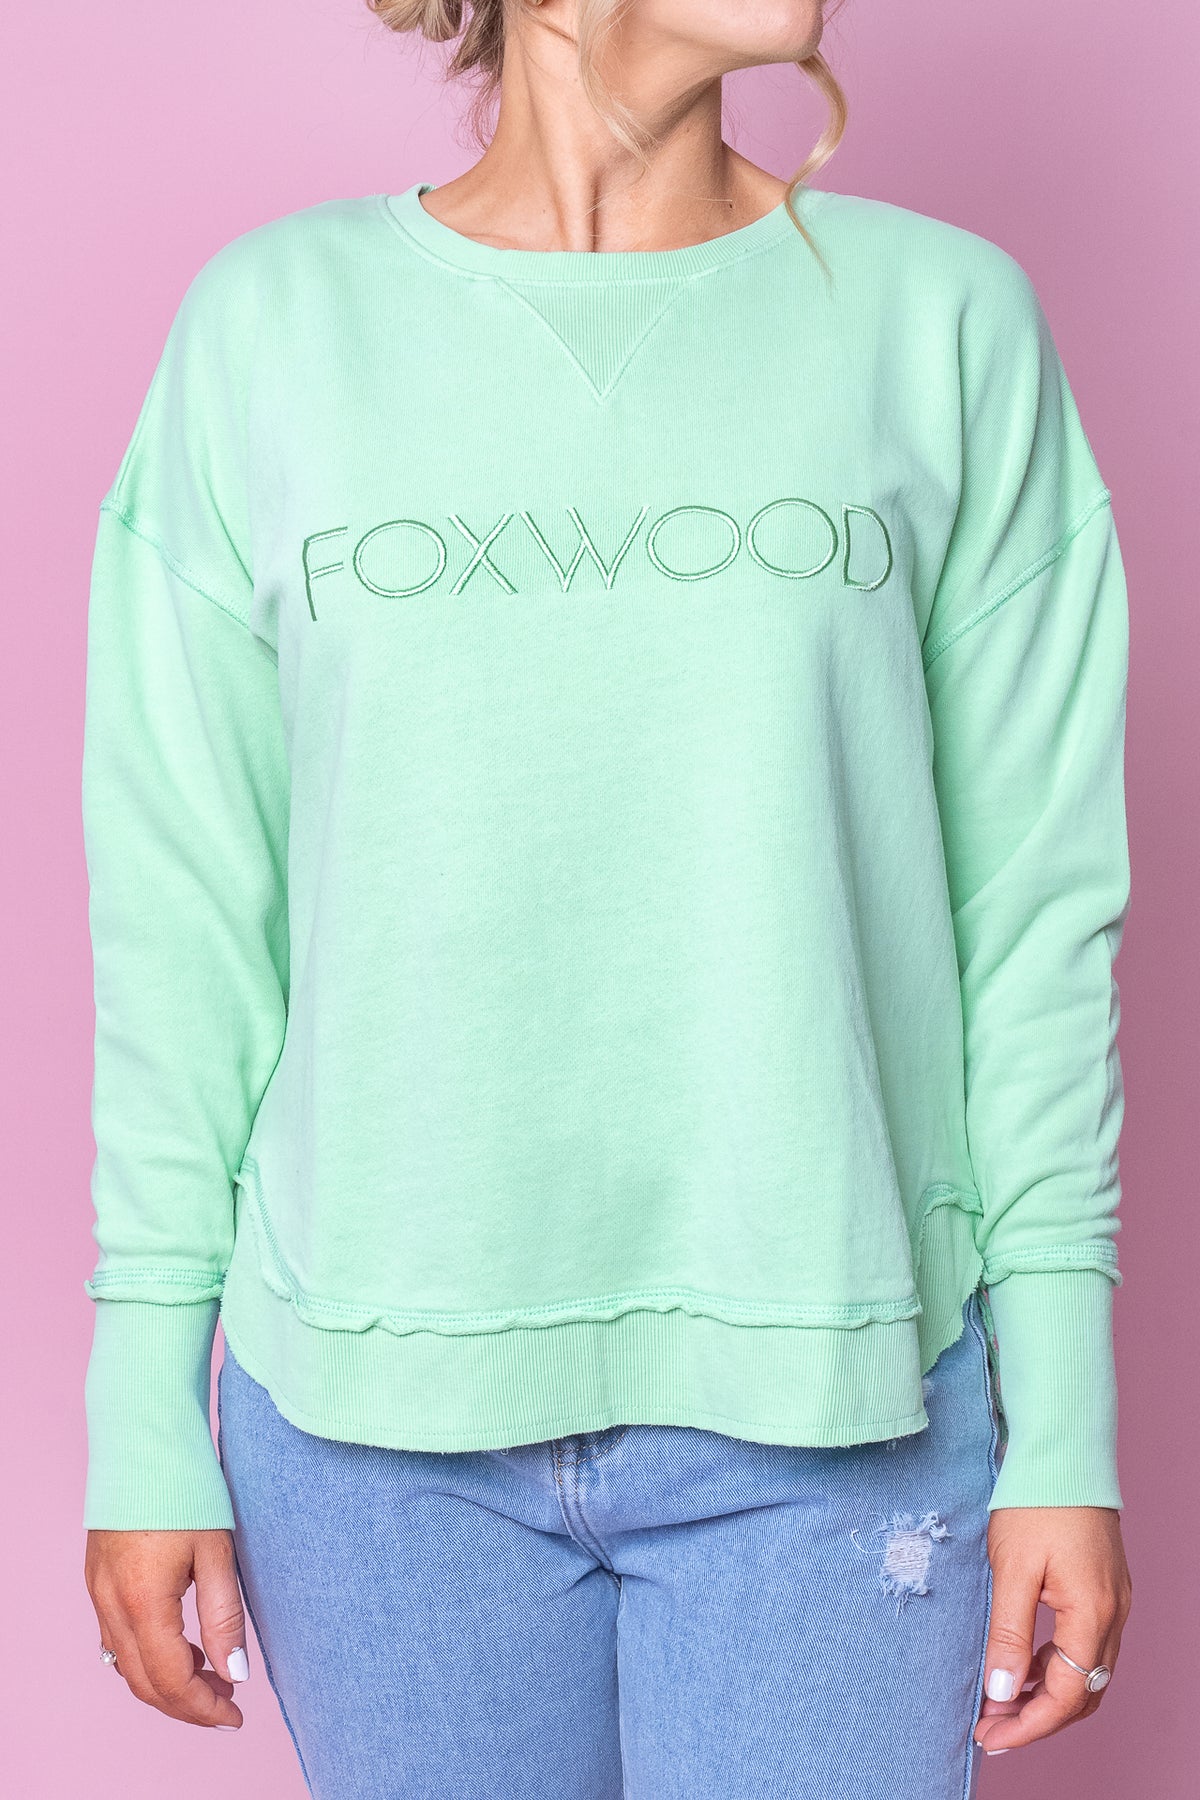 Simplified Crew in Mint - Foxwood